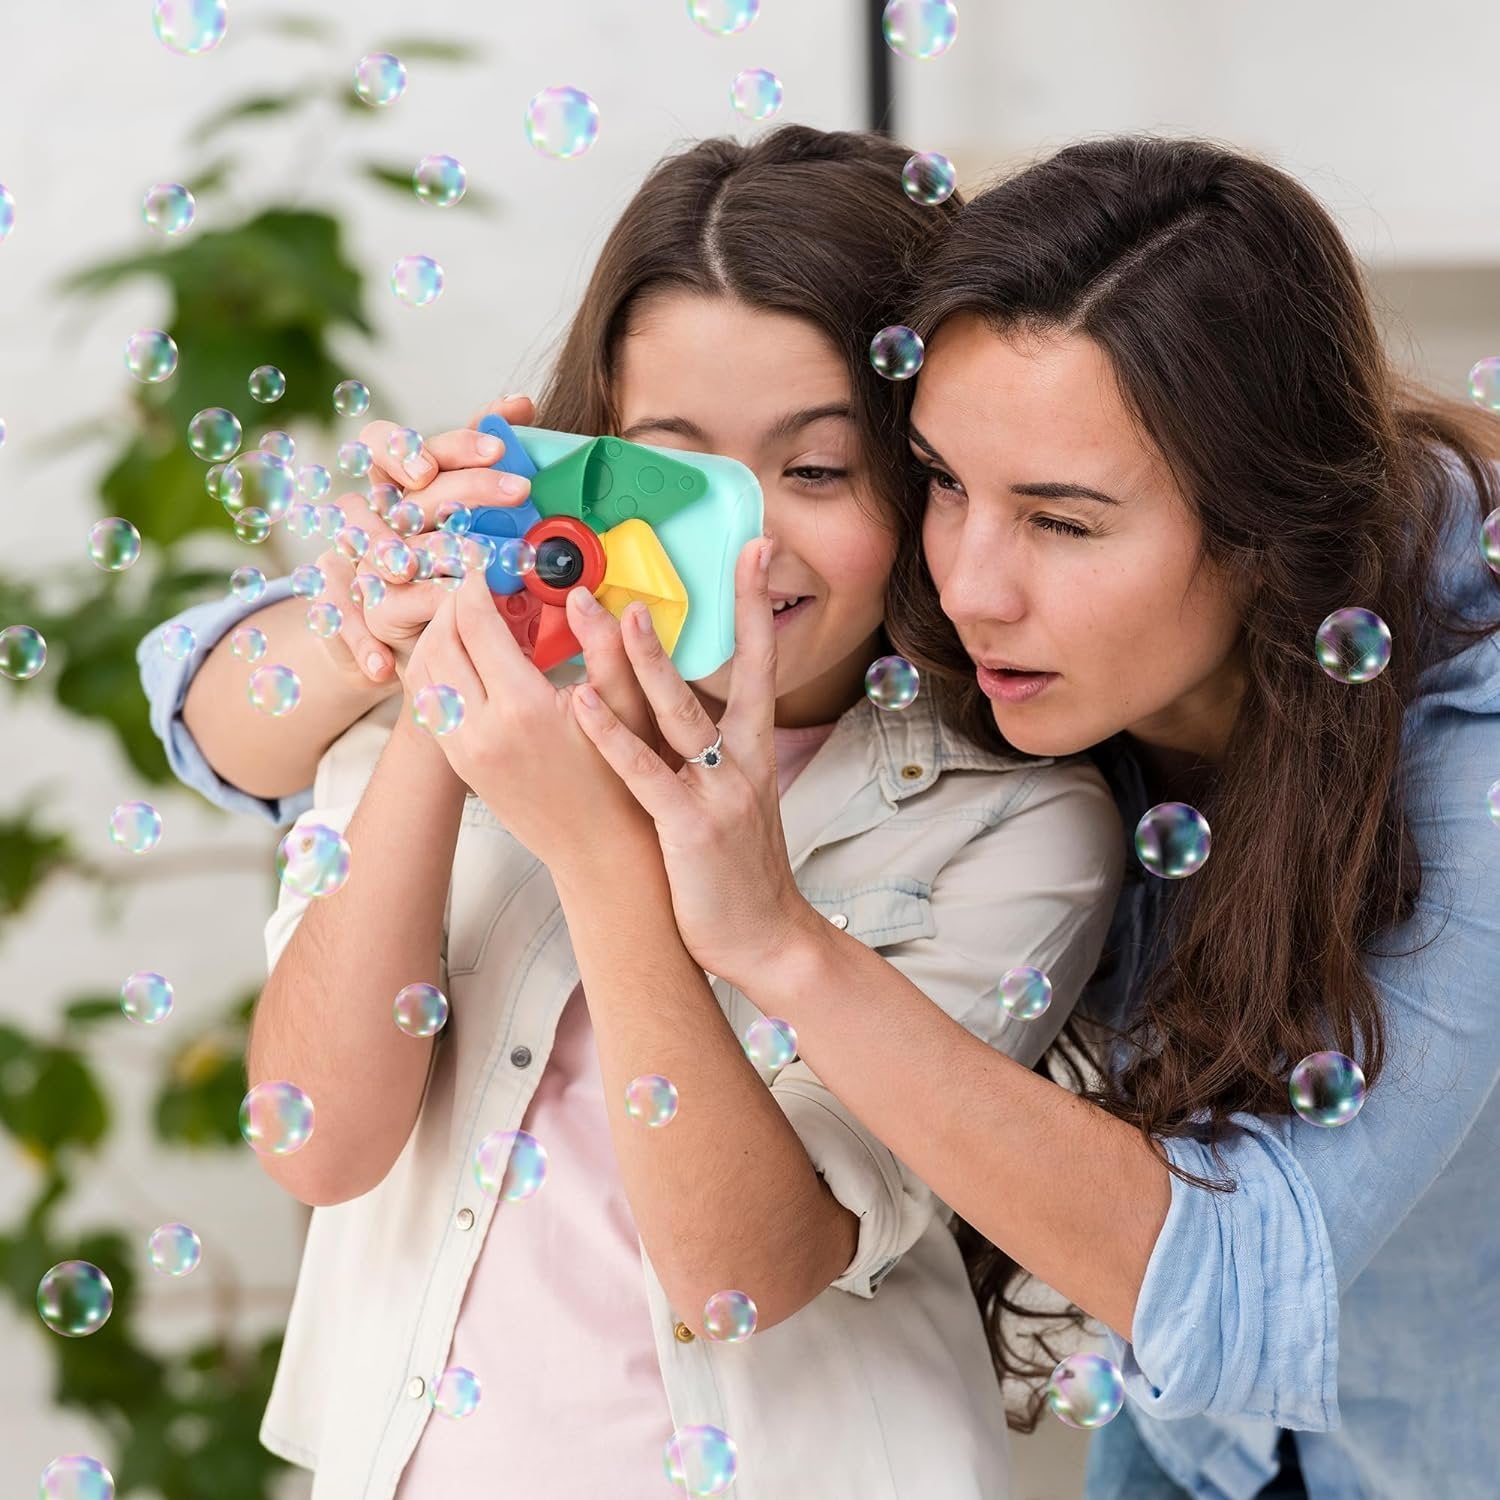 Pinwheel Camera Bubble Machine for Kids - Camera Shaped Bubble Toy with Neck Strap and Solution - Small Bubble Machine for Kids with Sounds, Music, and Lights for Extra Fun